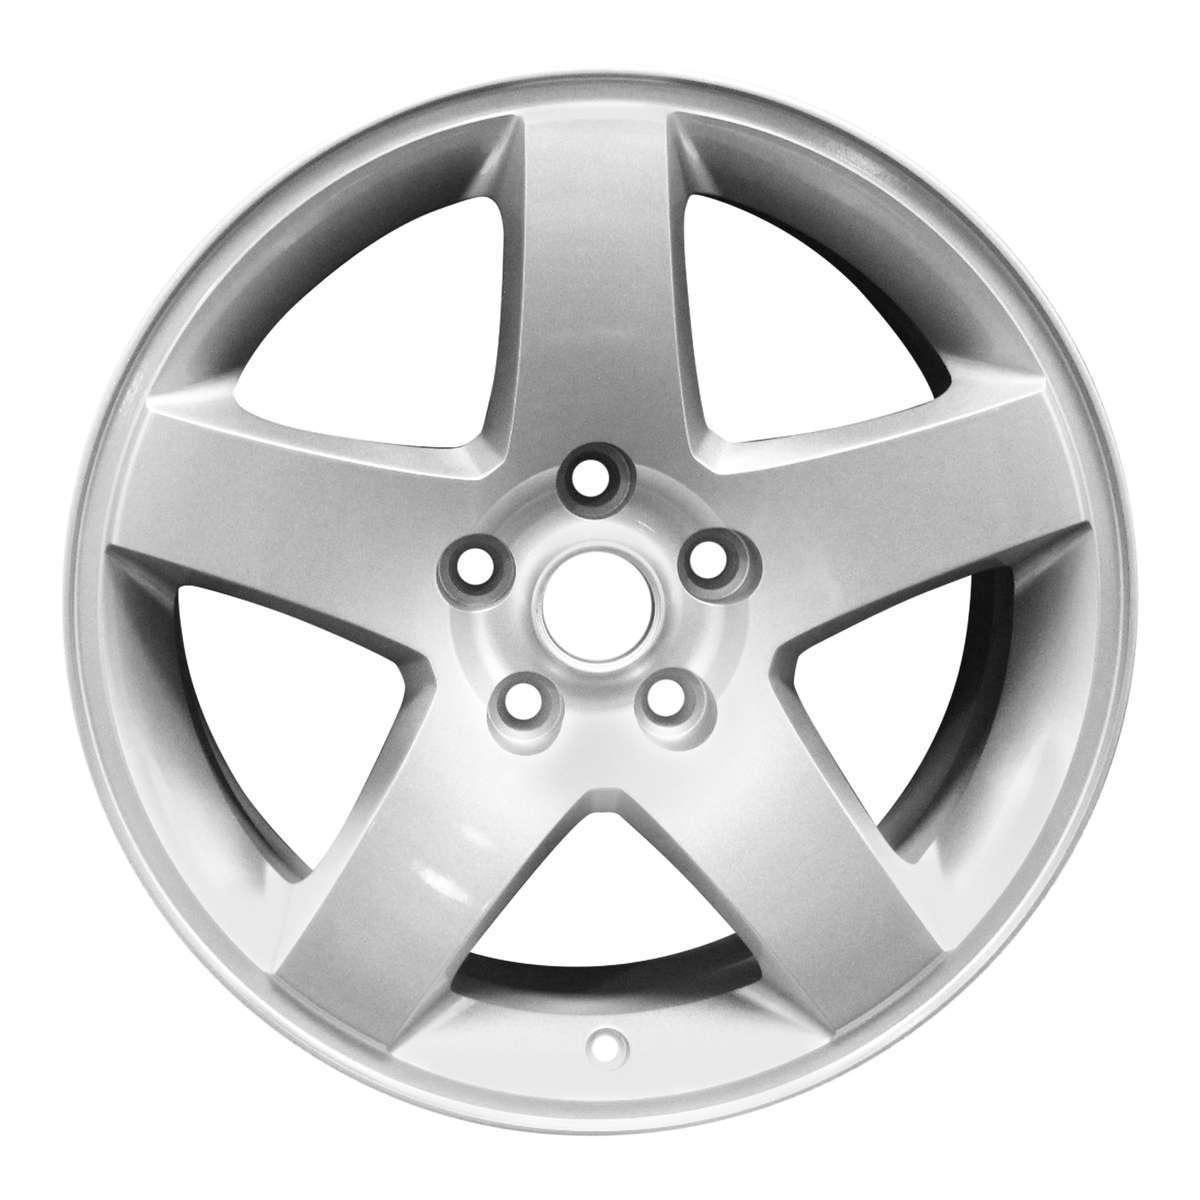 2009 Dodge Charger New 17" Replacement Wheel Rim RW2325S